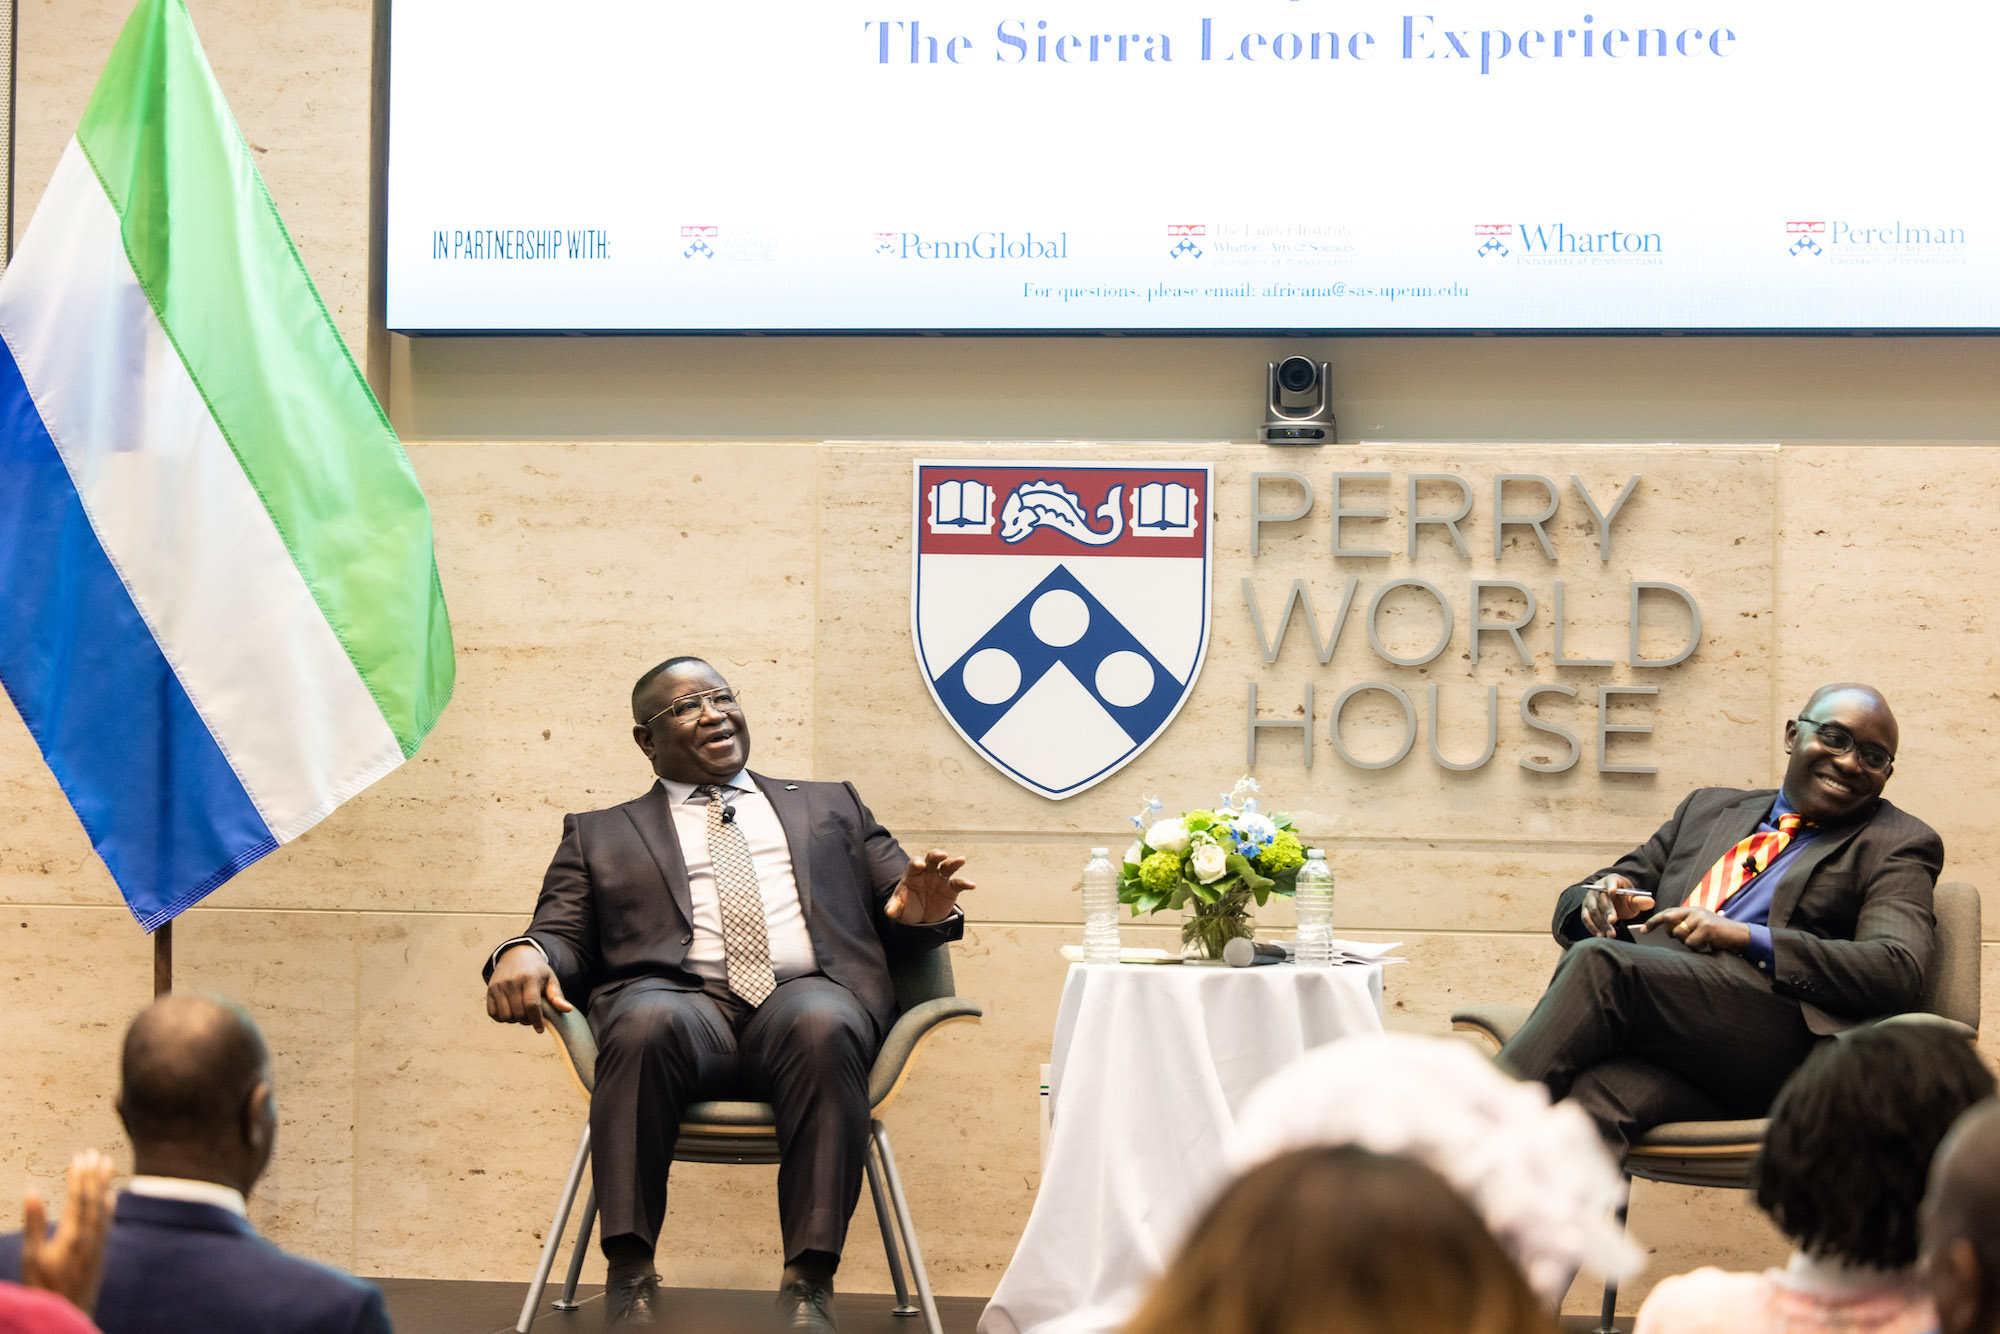 The President of Sierra Leone sits on a stage next to a flag of his nation, and the head of Penn's Center for Africana Studies sits near him and laughs at what he's saying.